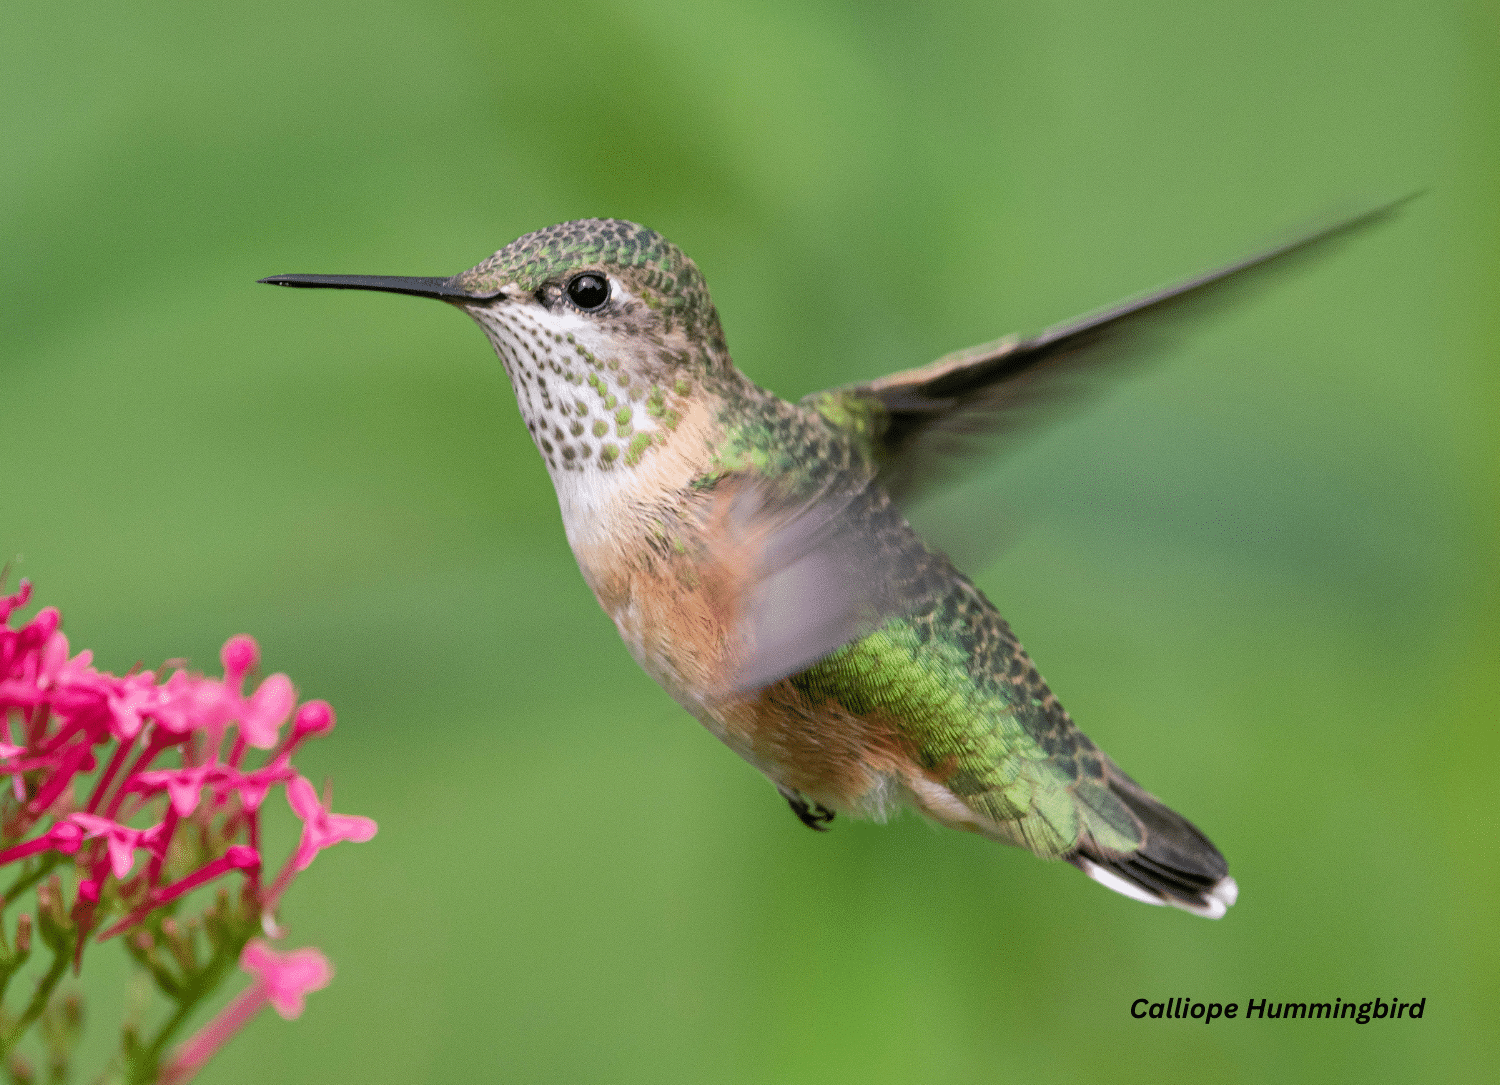 horizontal photo of a Calliope Hummingbird hovering near some pink flowers